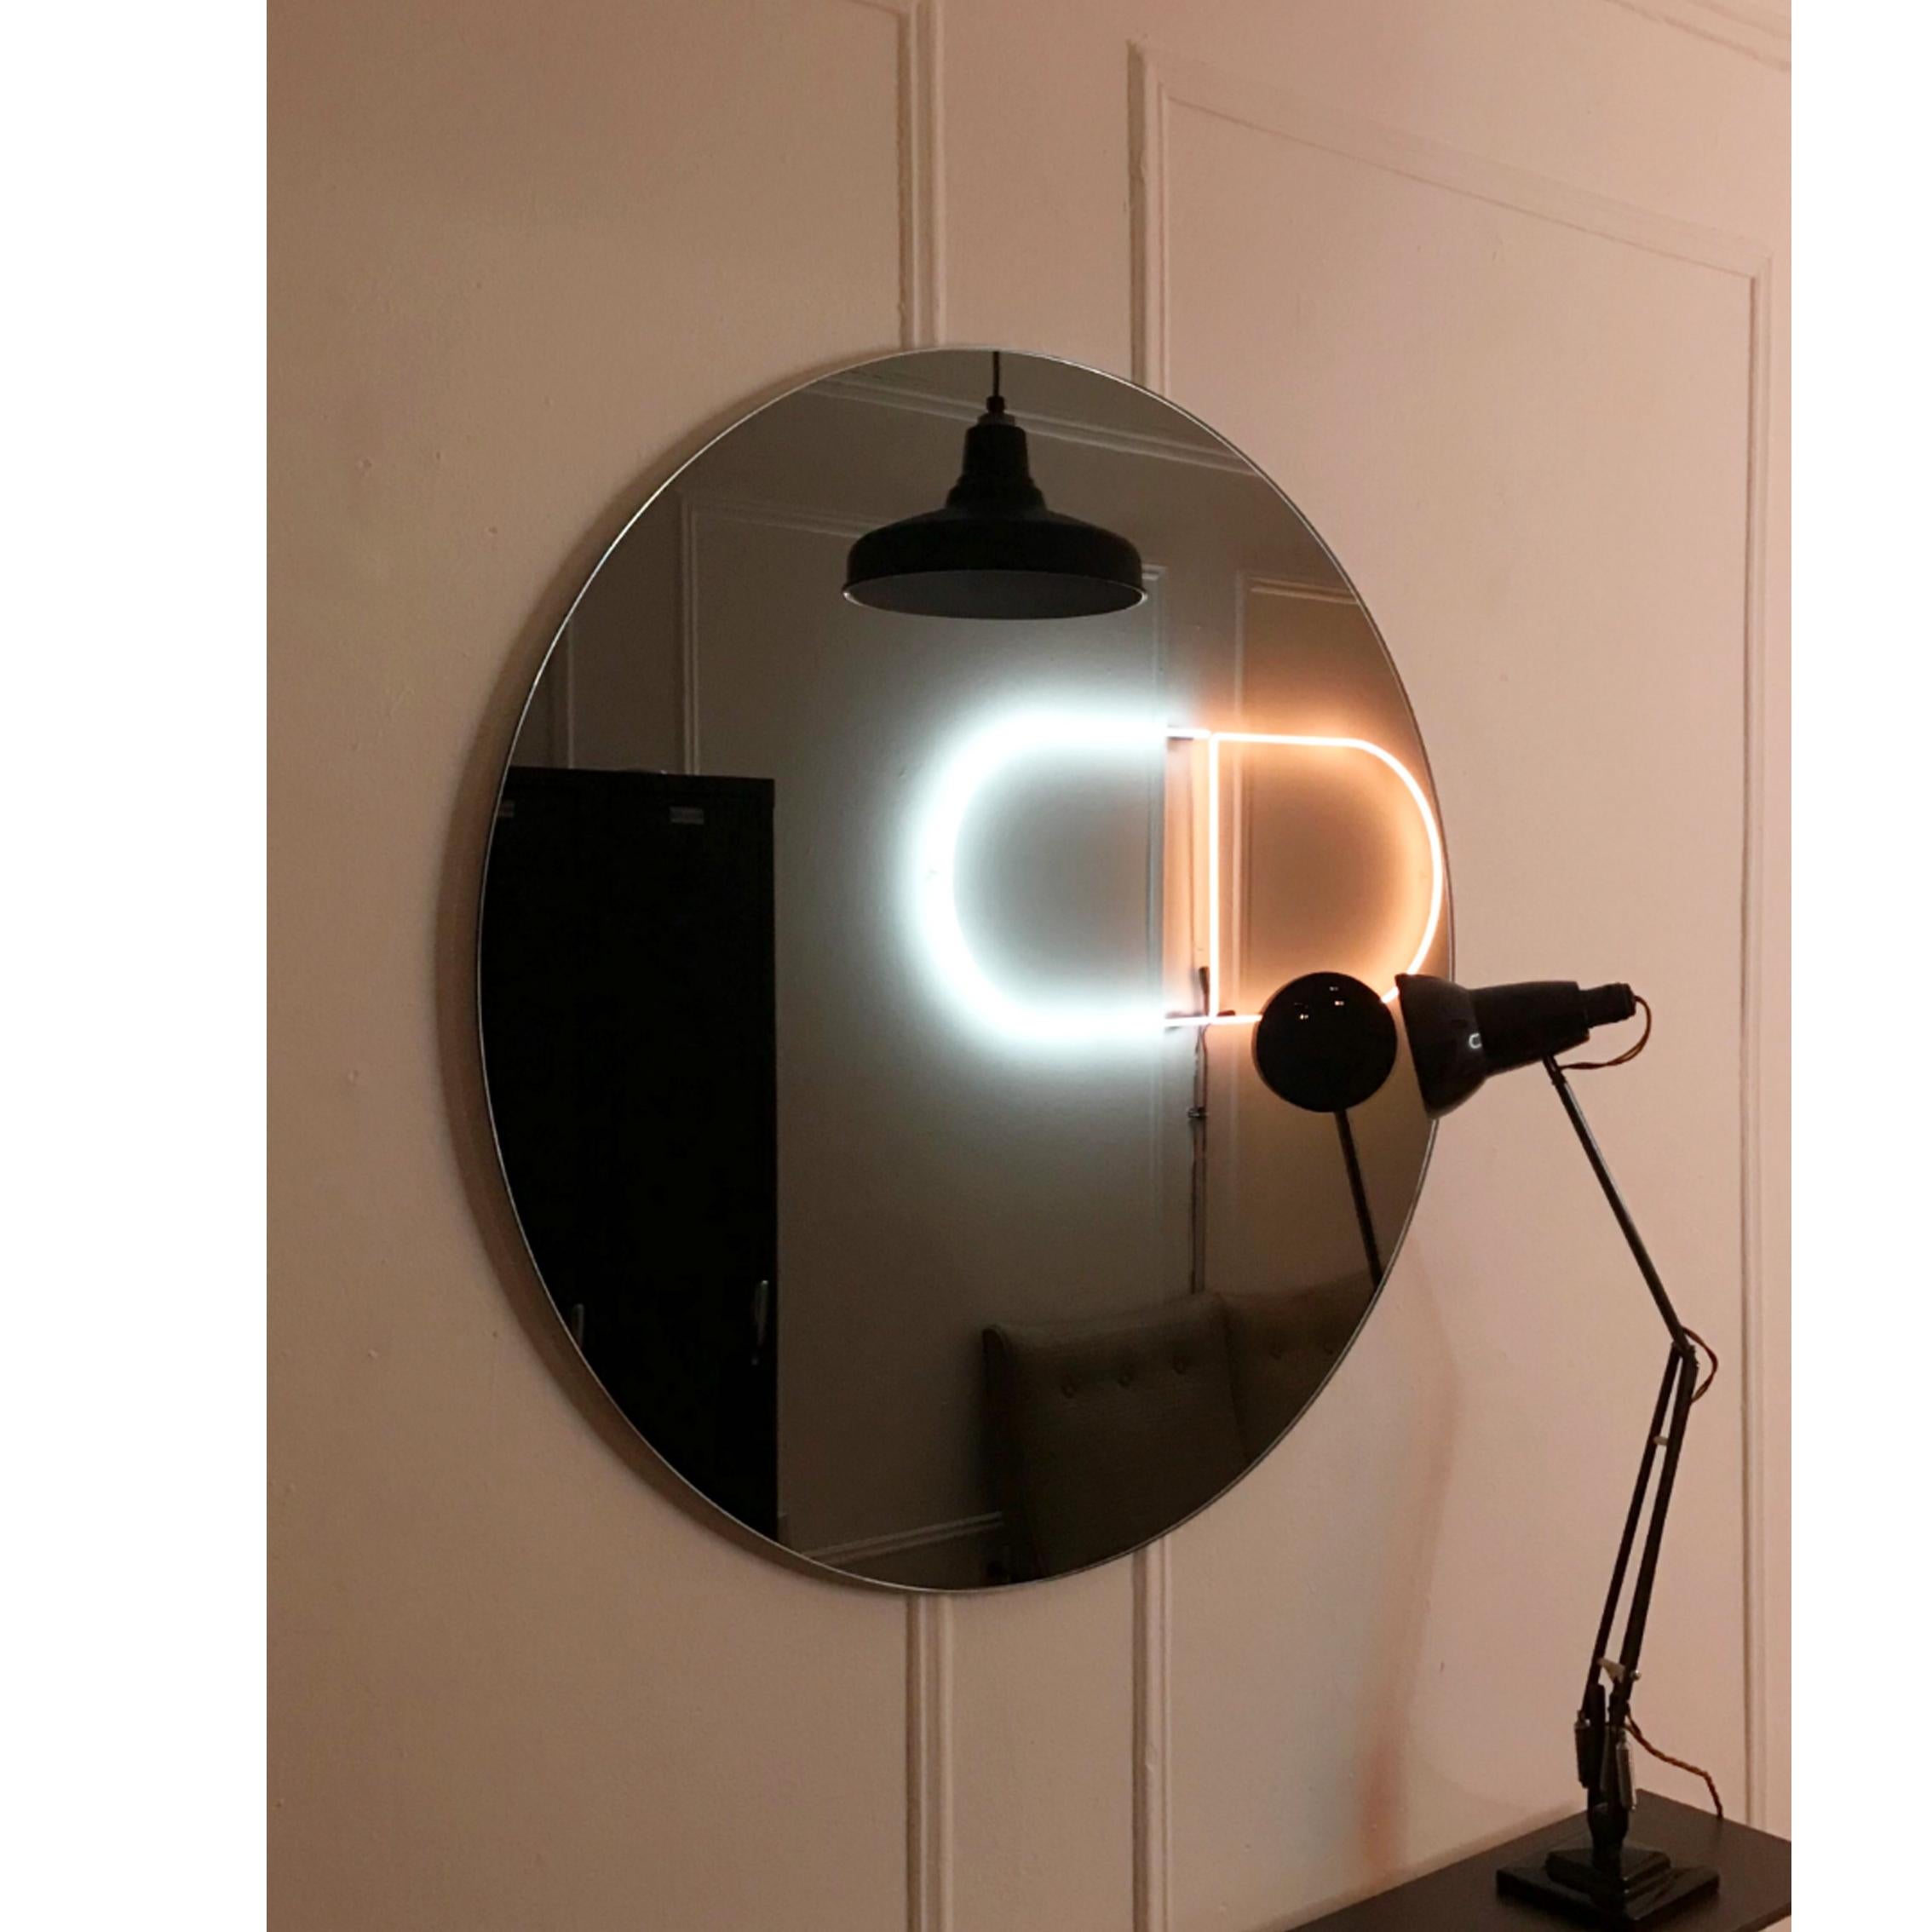 Orbis Black Tinted Round Frameless Contemporary Mirror, Large For Sale 4